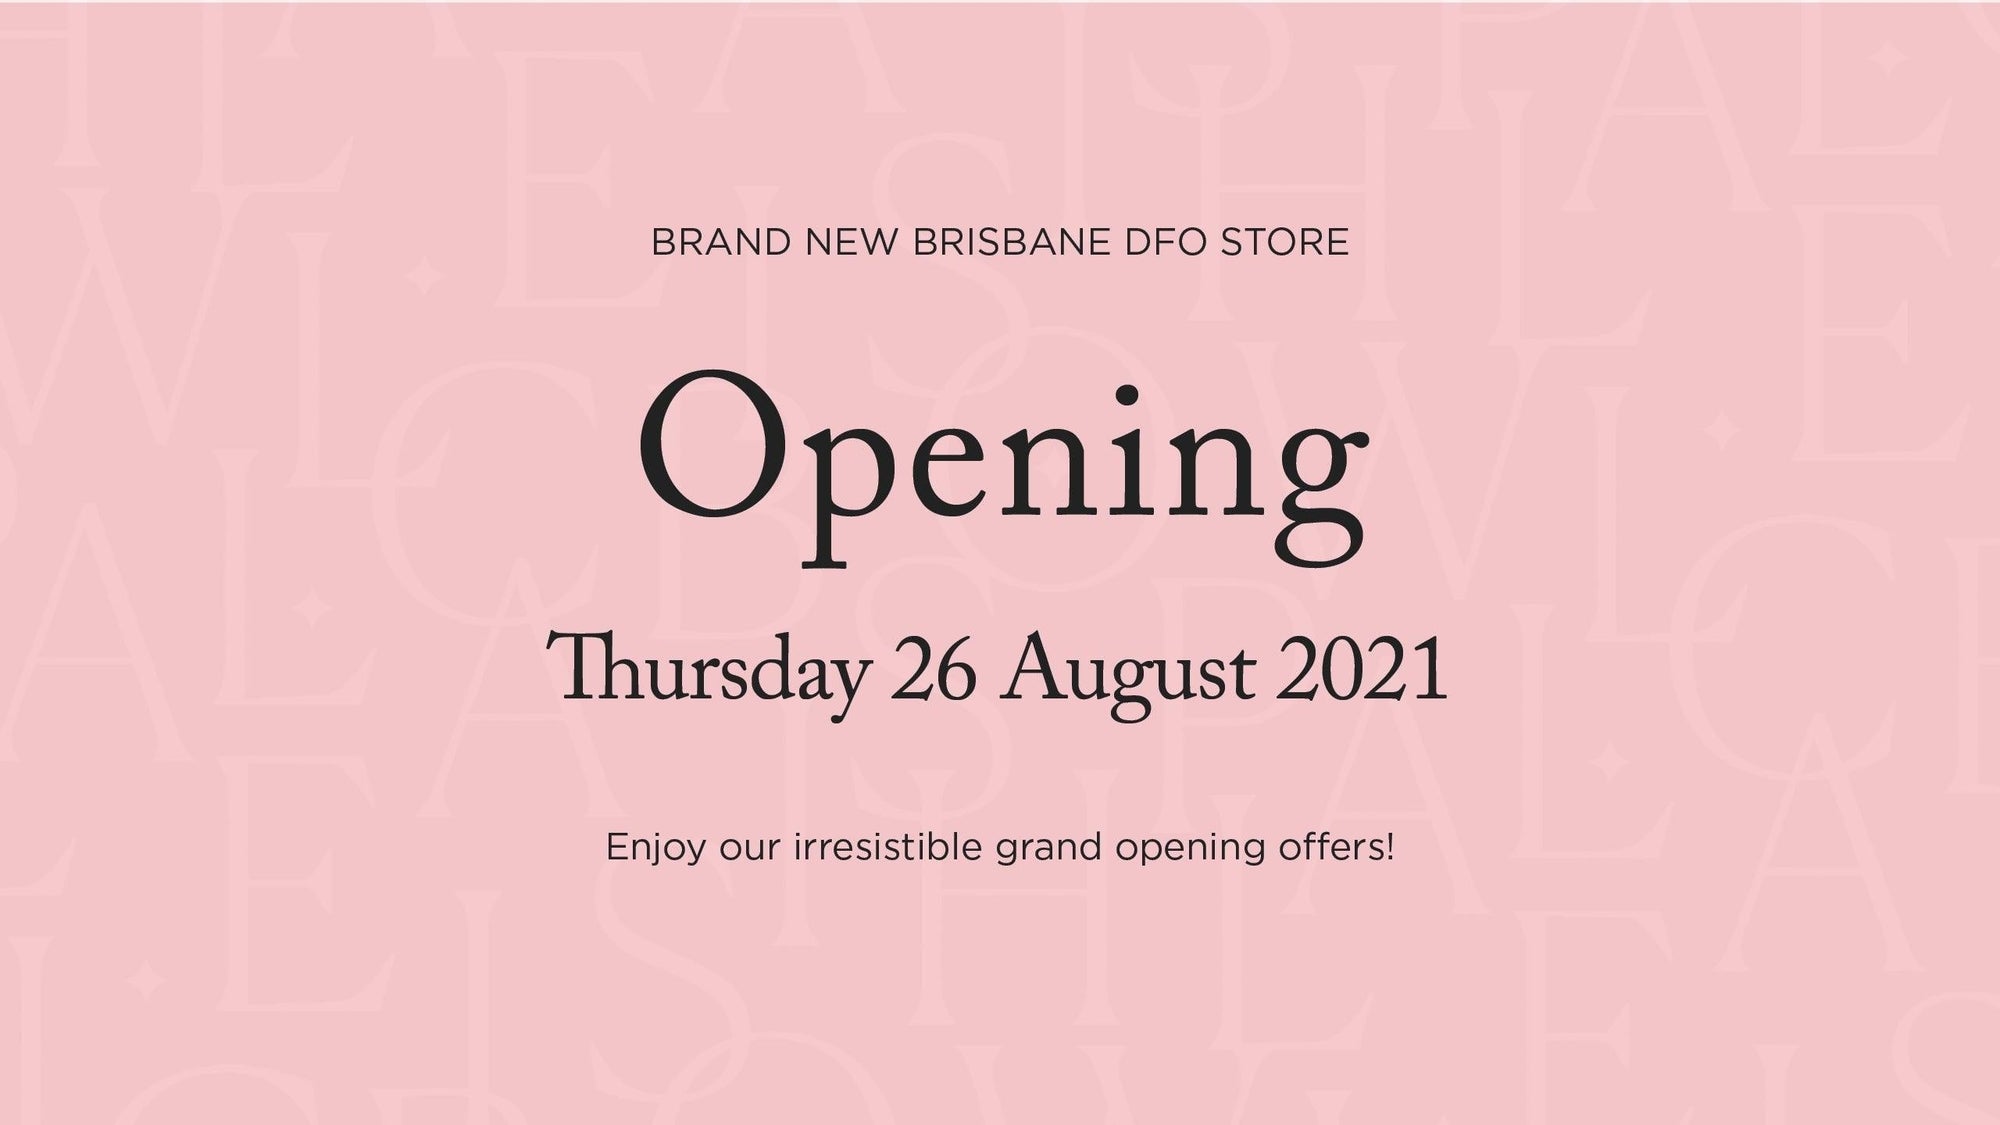 New DFO Brisbane store opens Thursday 26 August! - Wallace Bishop